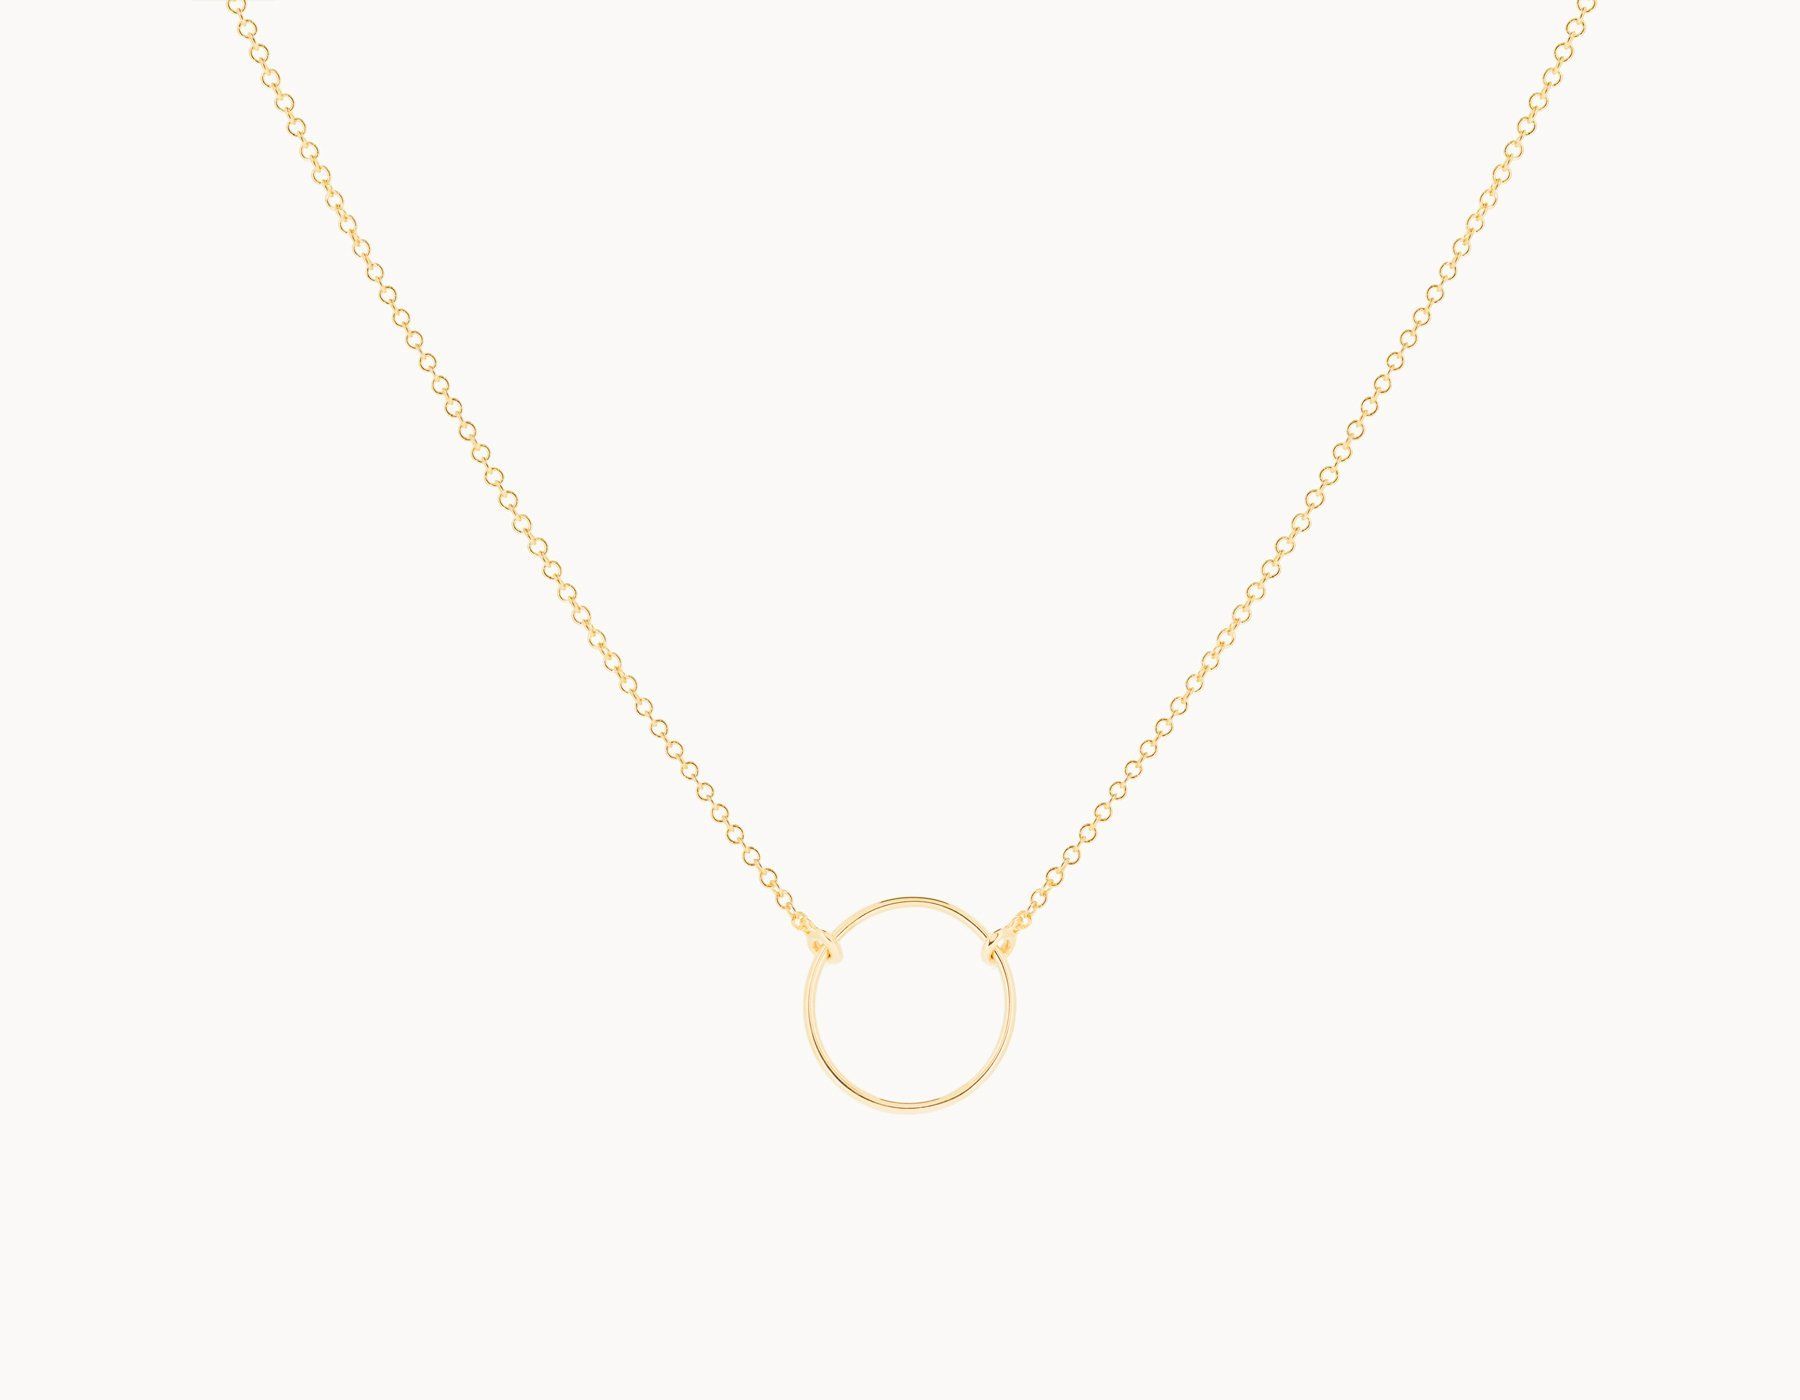 Circle Necklace | Ooh La La – My Style | Circle Necklace, Jewelry For Most Recent Circle Of Sparkle Necklaces (View 9 of 25)